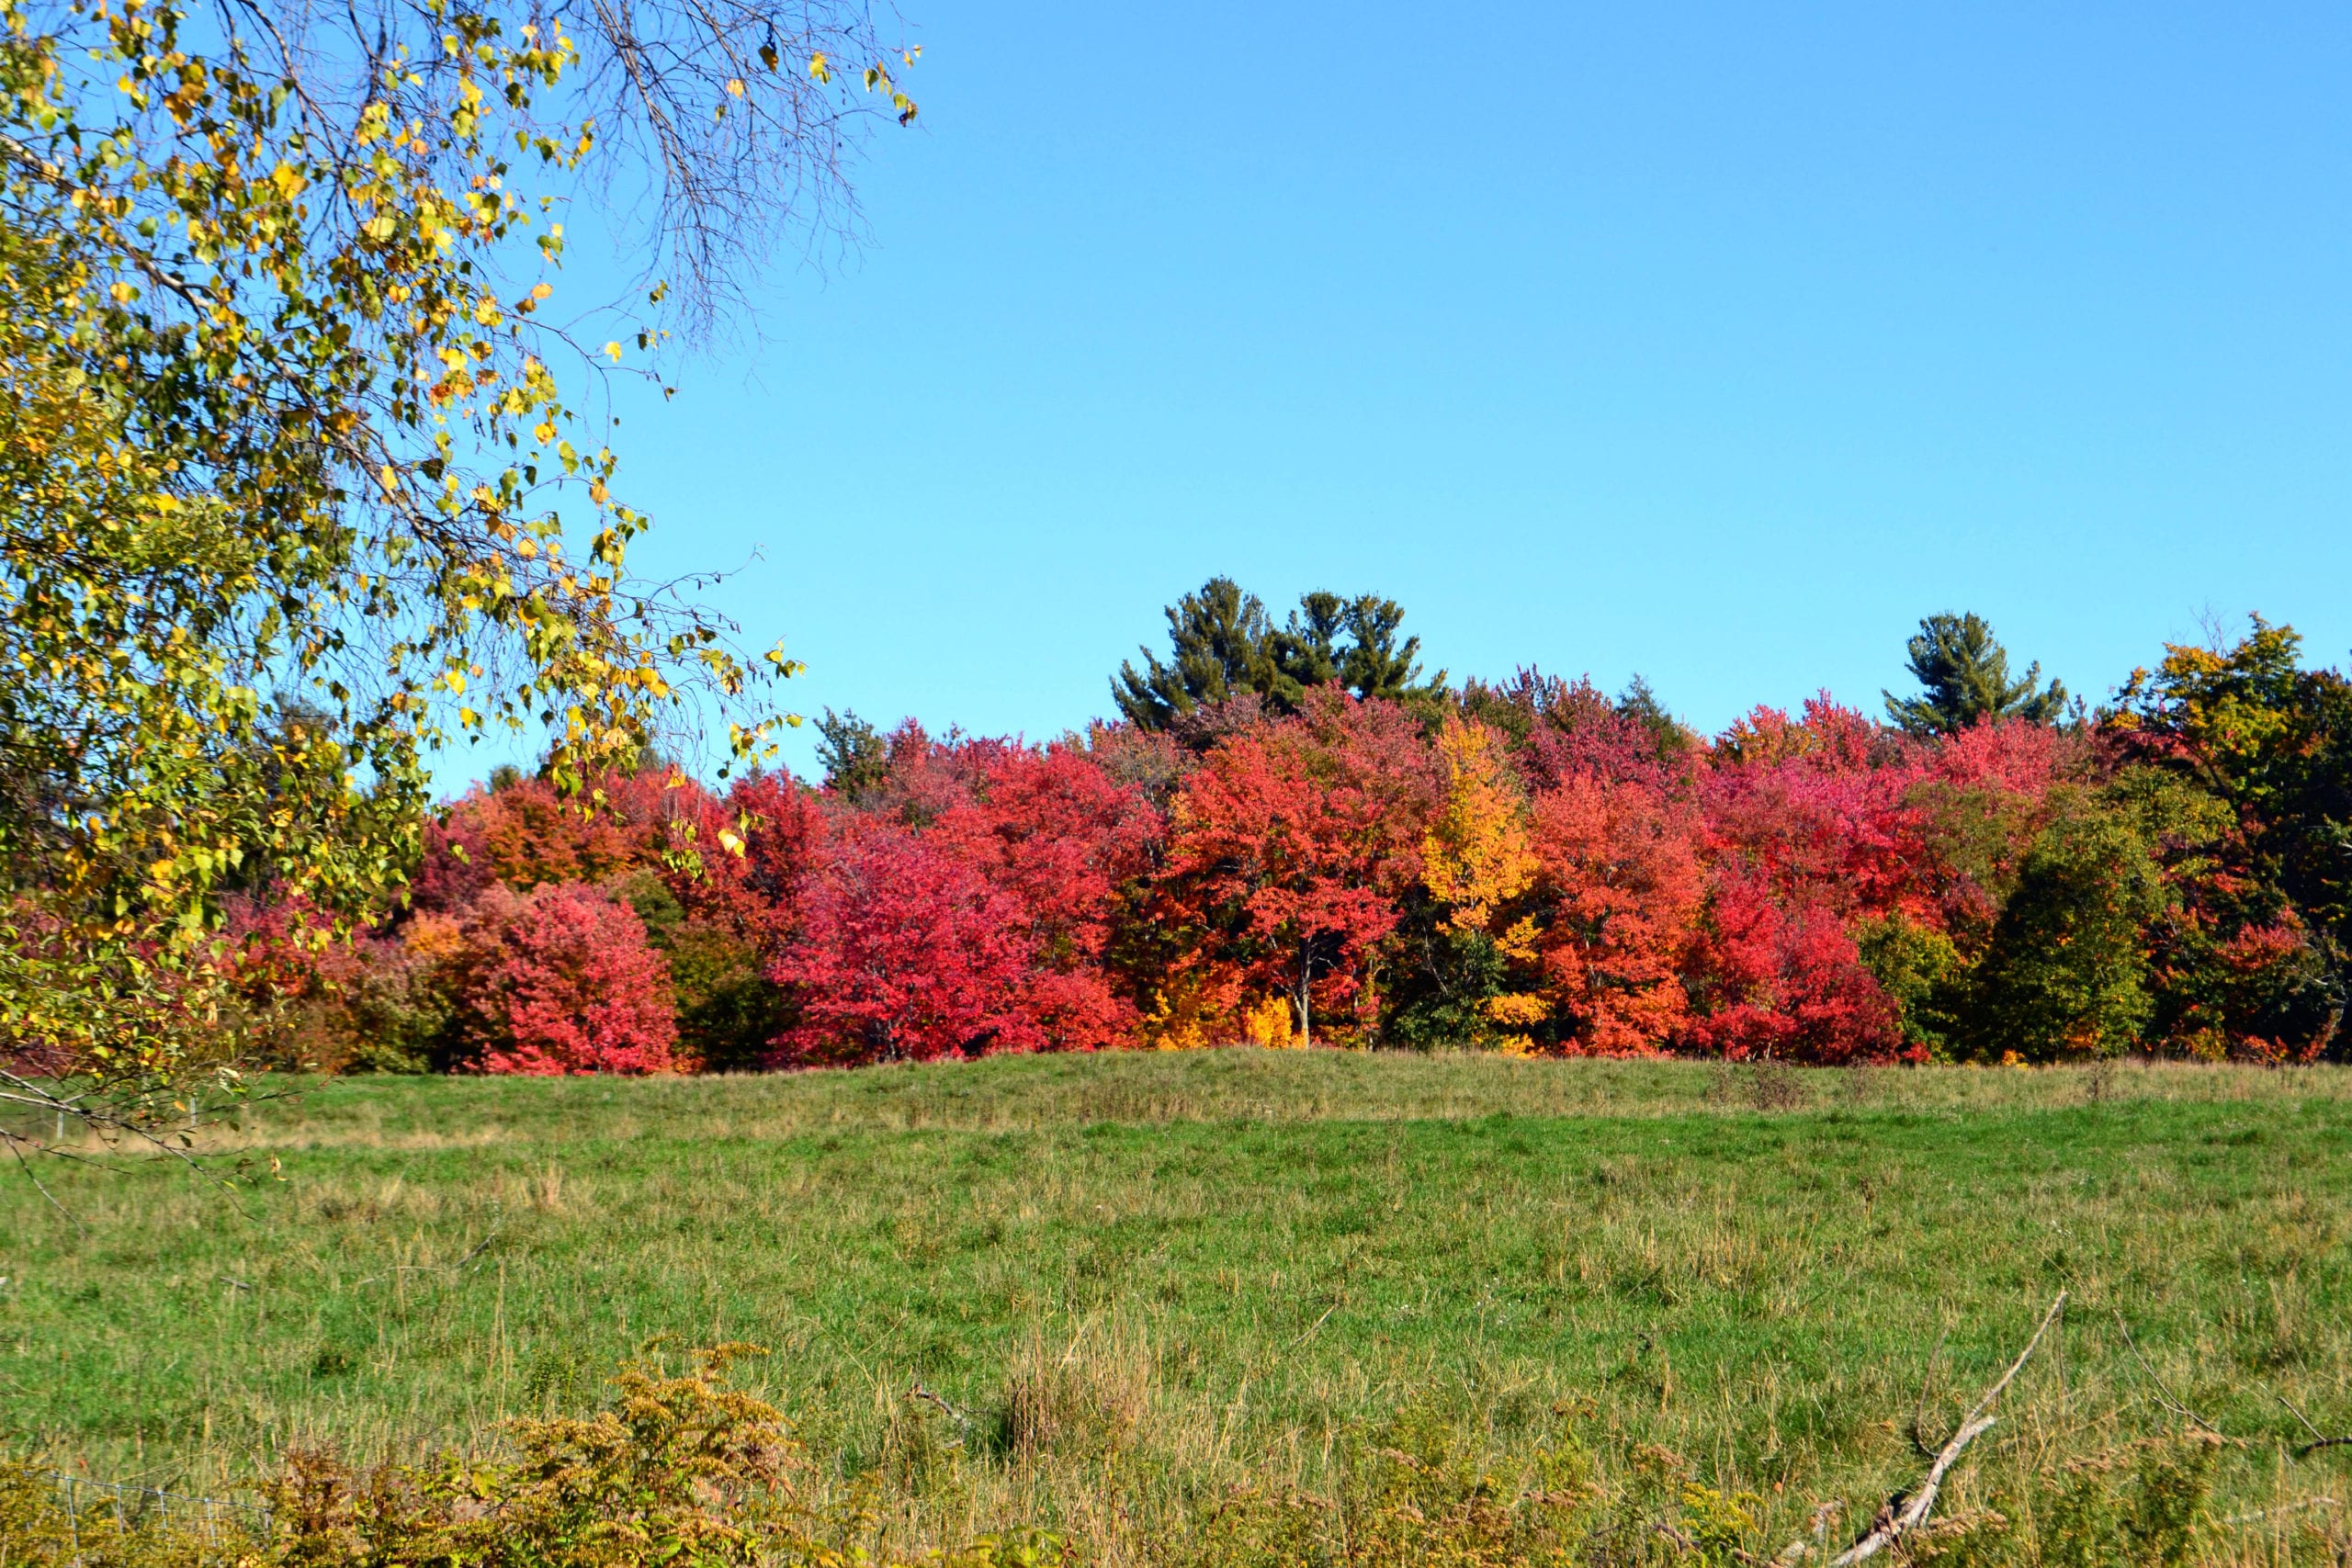 a field opens up to meet brightly colored leaves on trees that border it